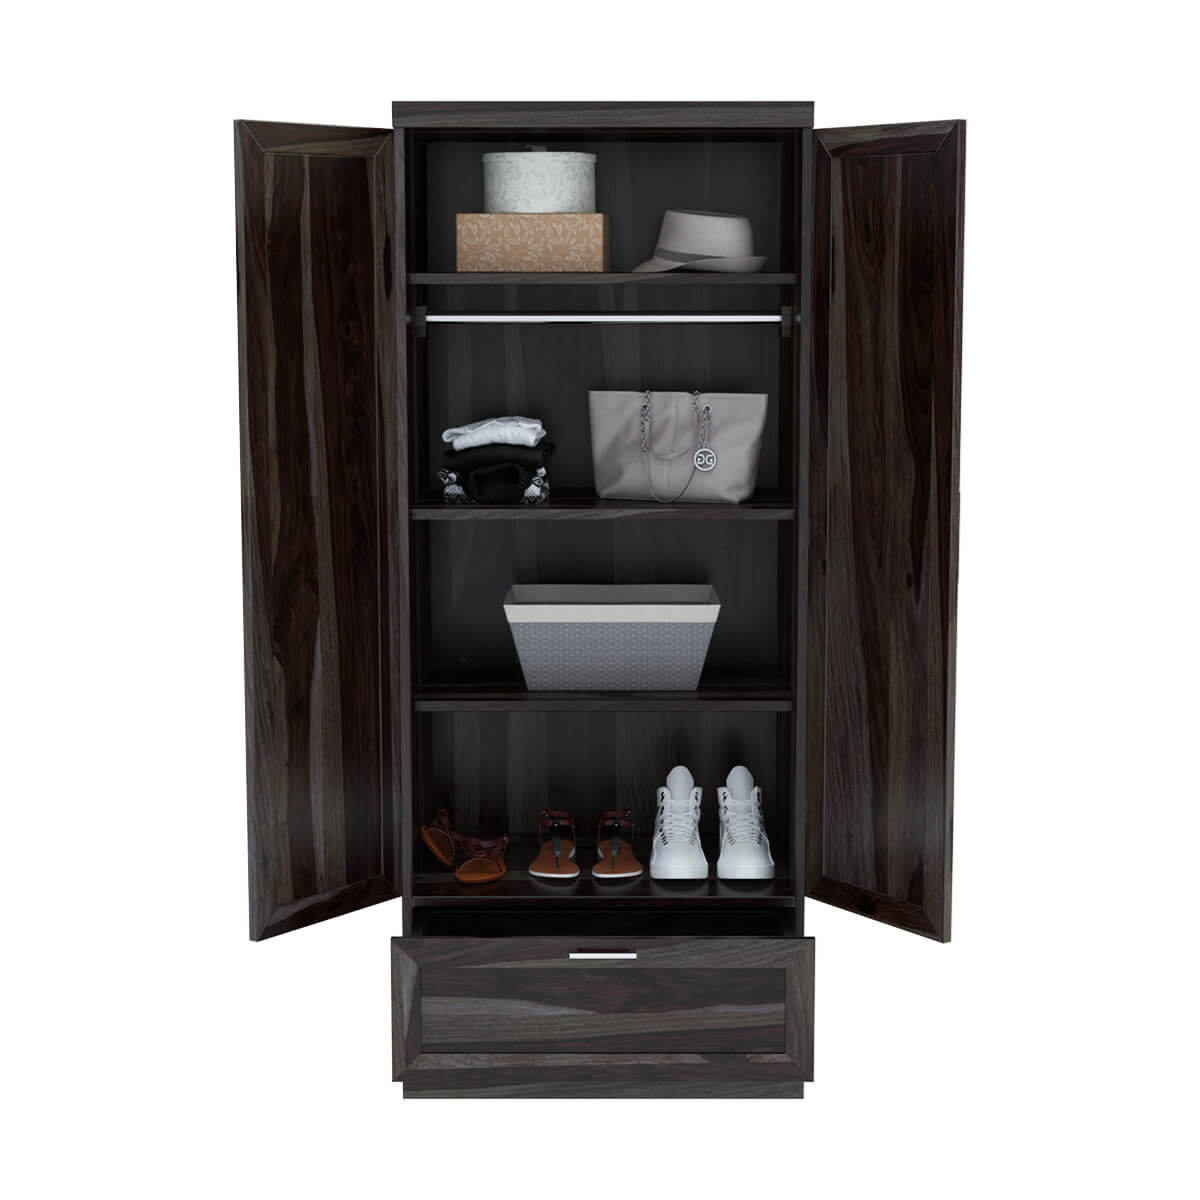 Royal Palace Wardrobe Solid Sheesham Wood Two Door With One Drawers  In Walnut Finish For Bedroom Furniture